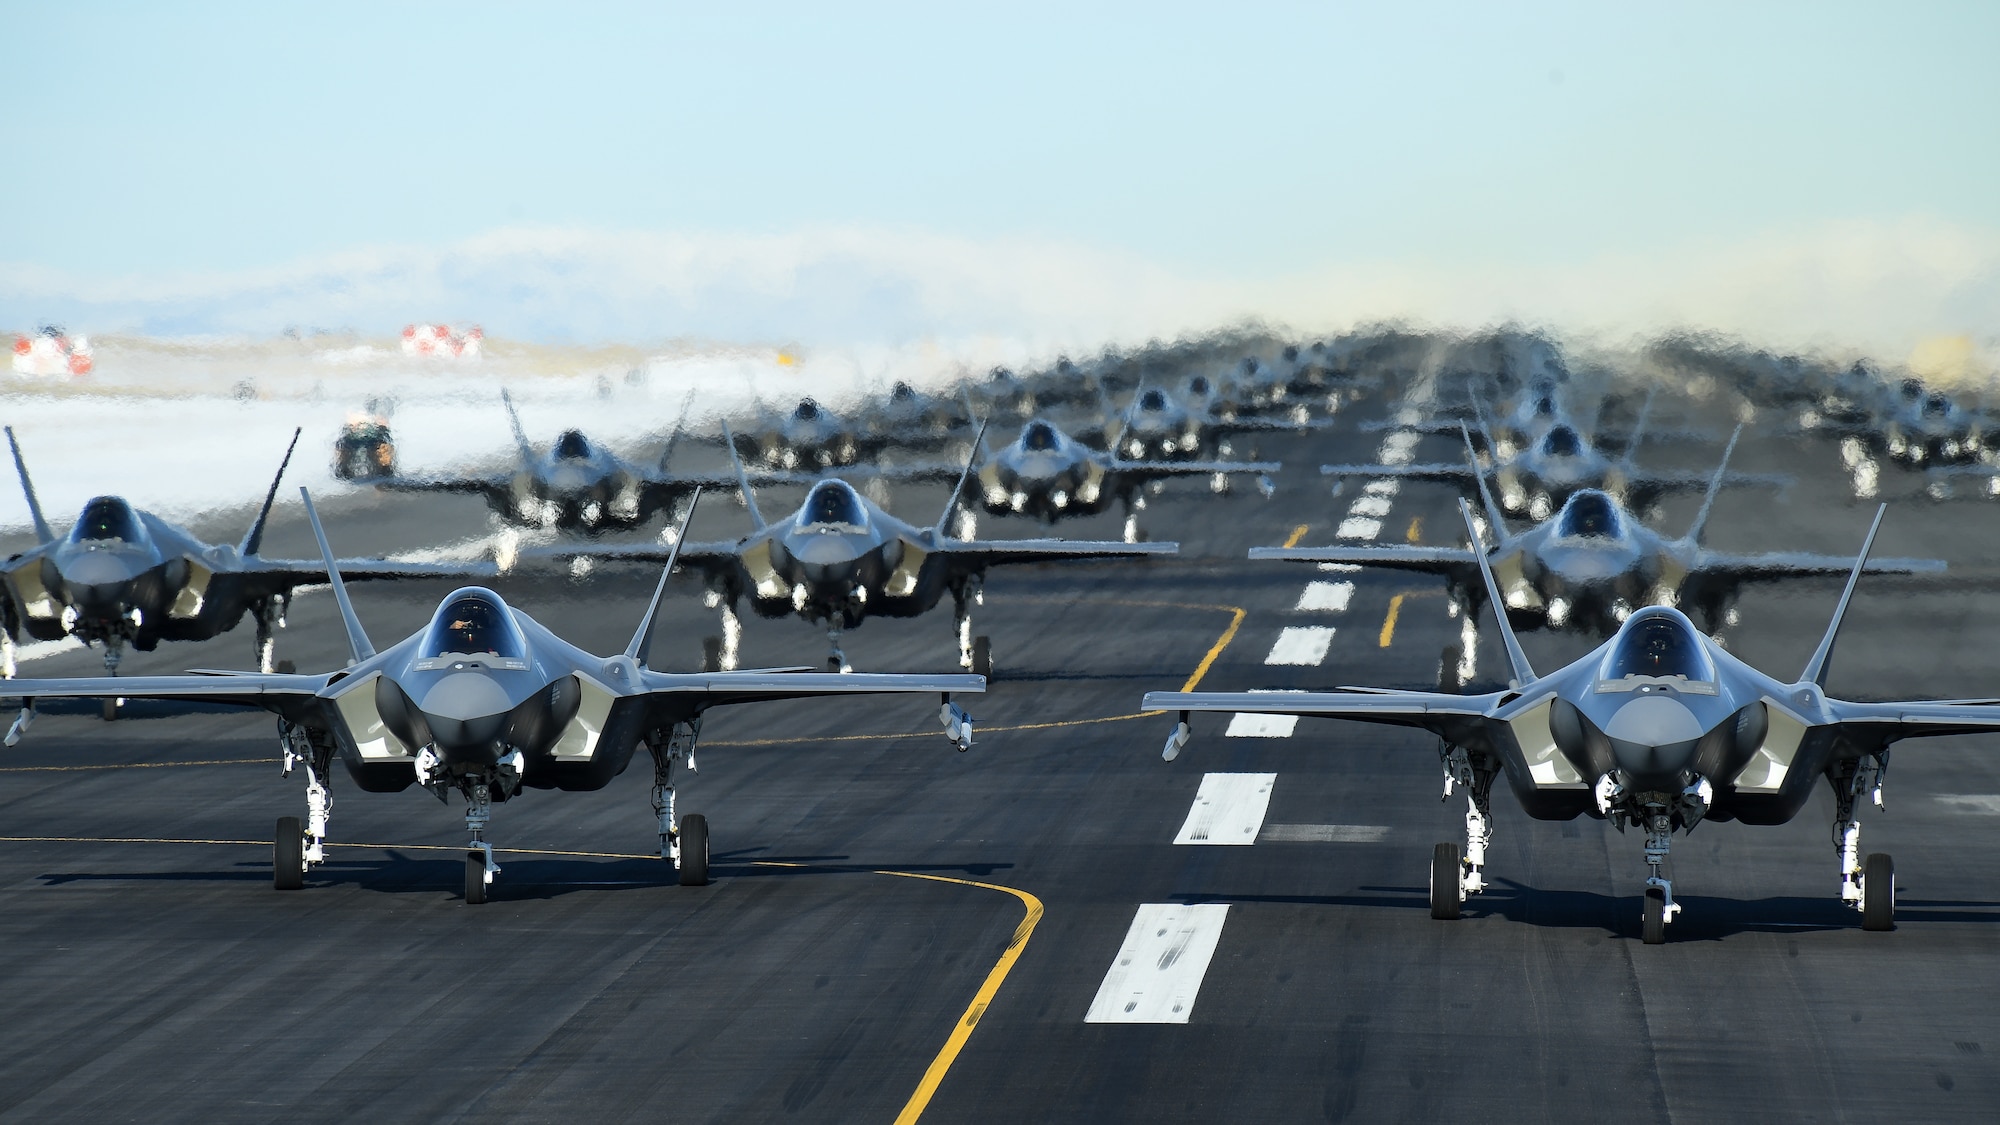 The active duty 388th and Reserve 419th Fighter Wings conducted an F-35A combat power exercise at Hill Air Force Base